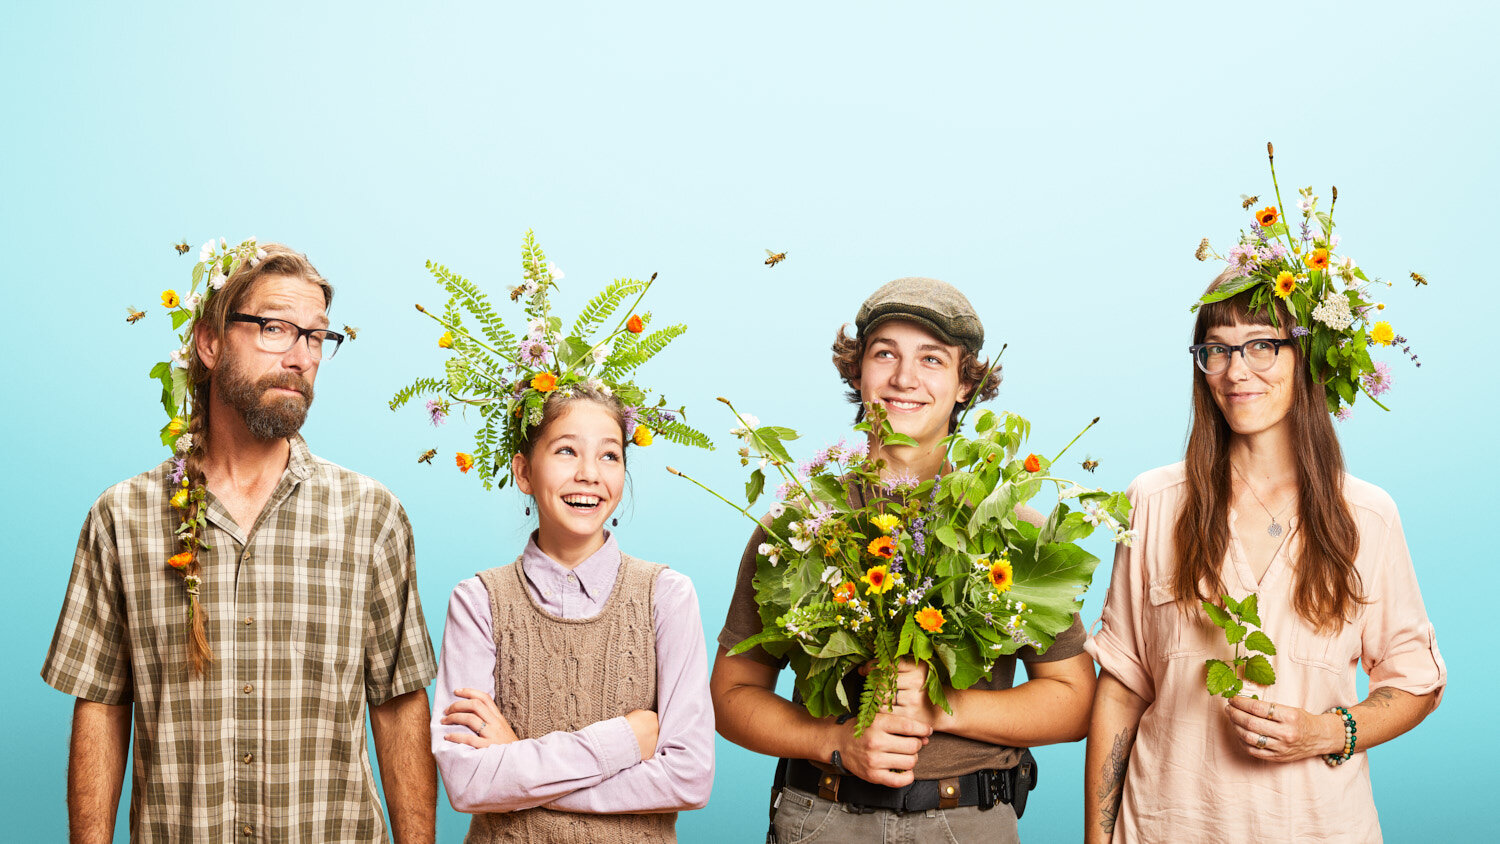 quirky commercial portraits for organic body care company LuSa Organics featuring herbal floral crowns and bouquets